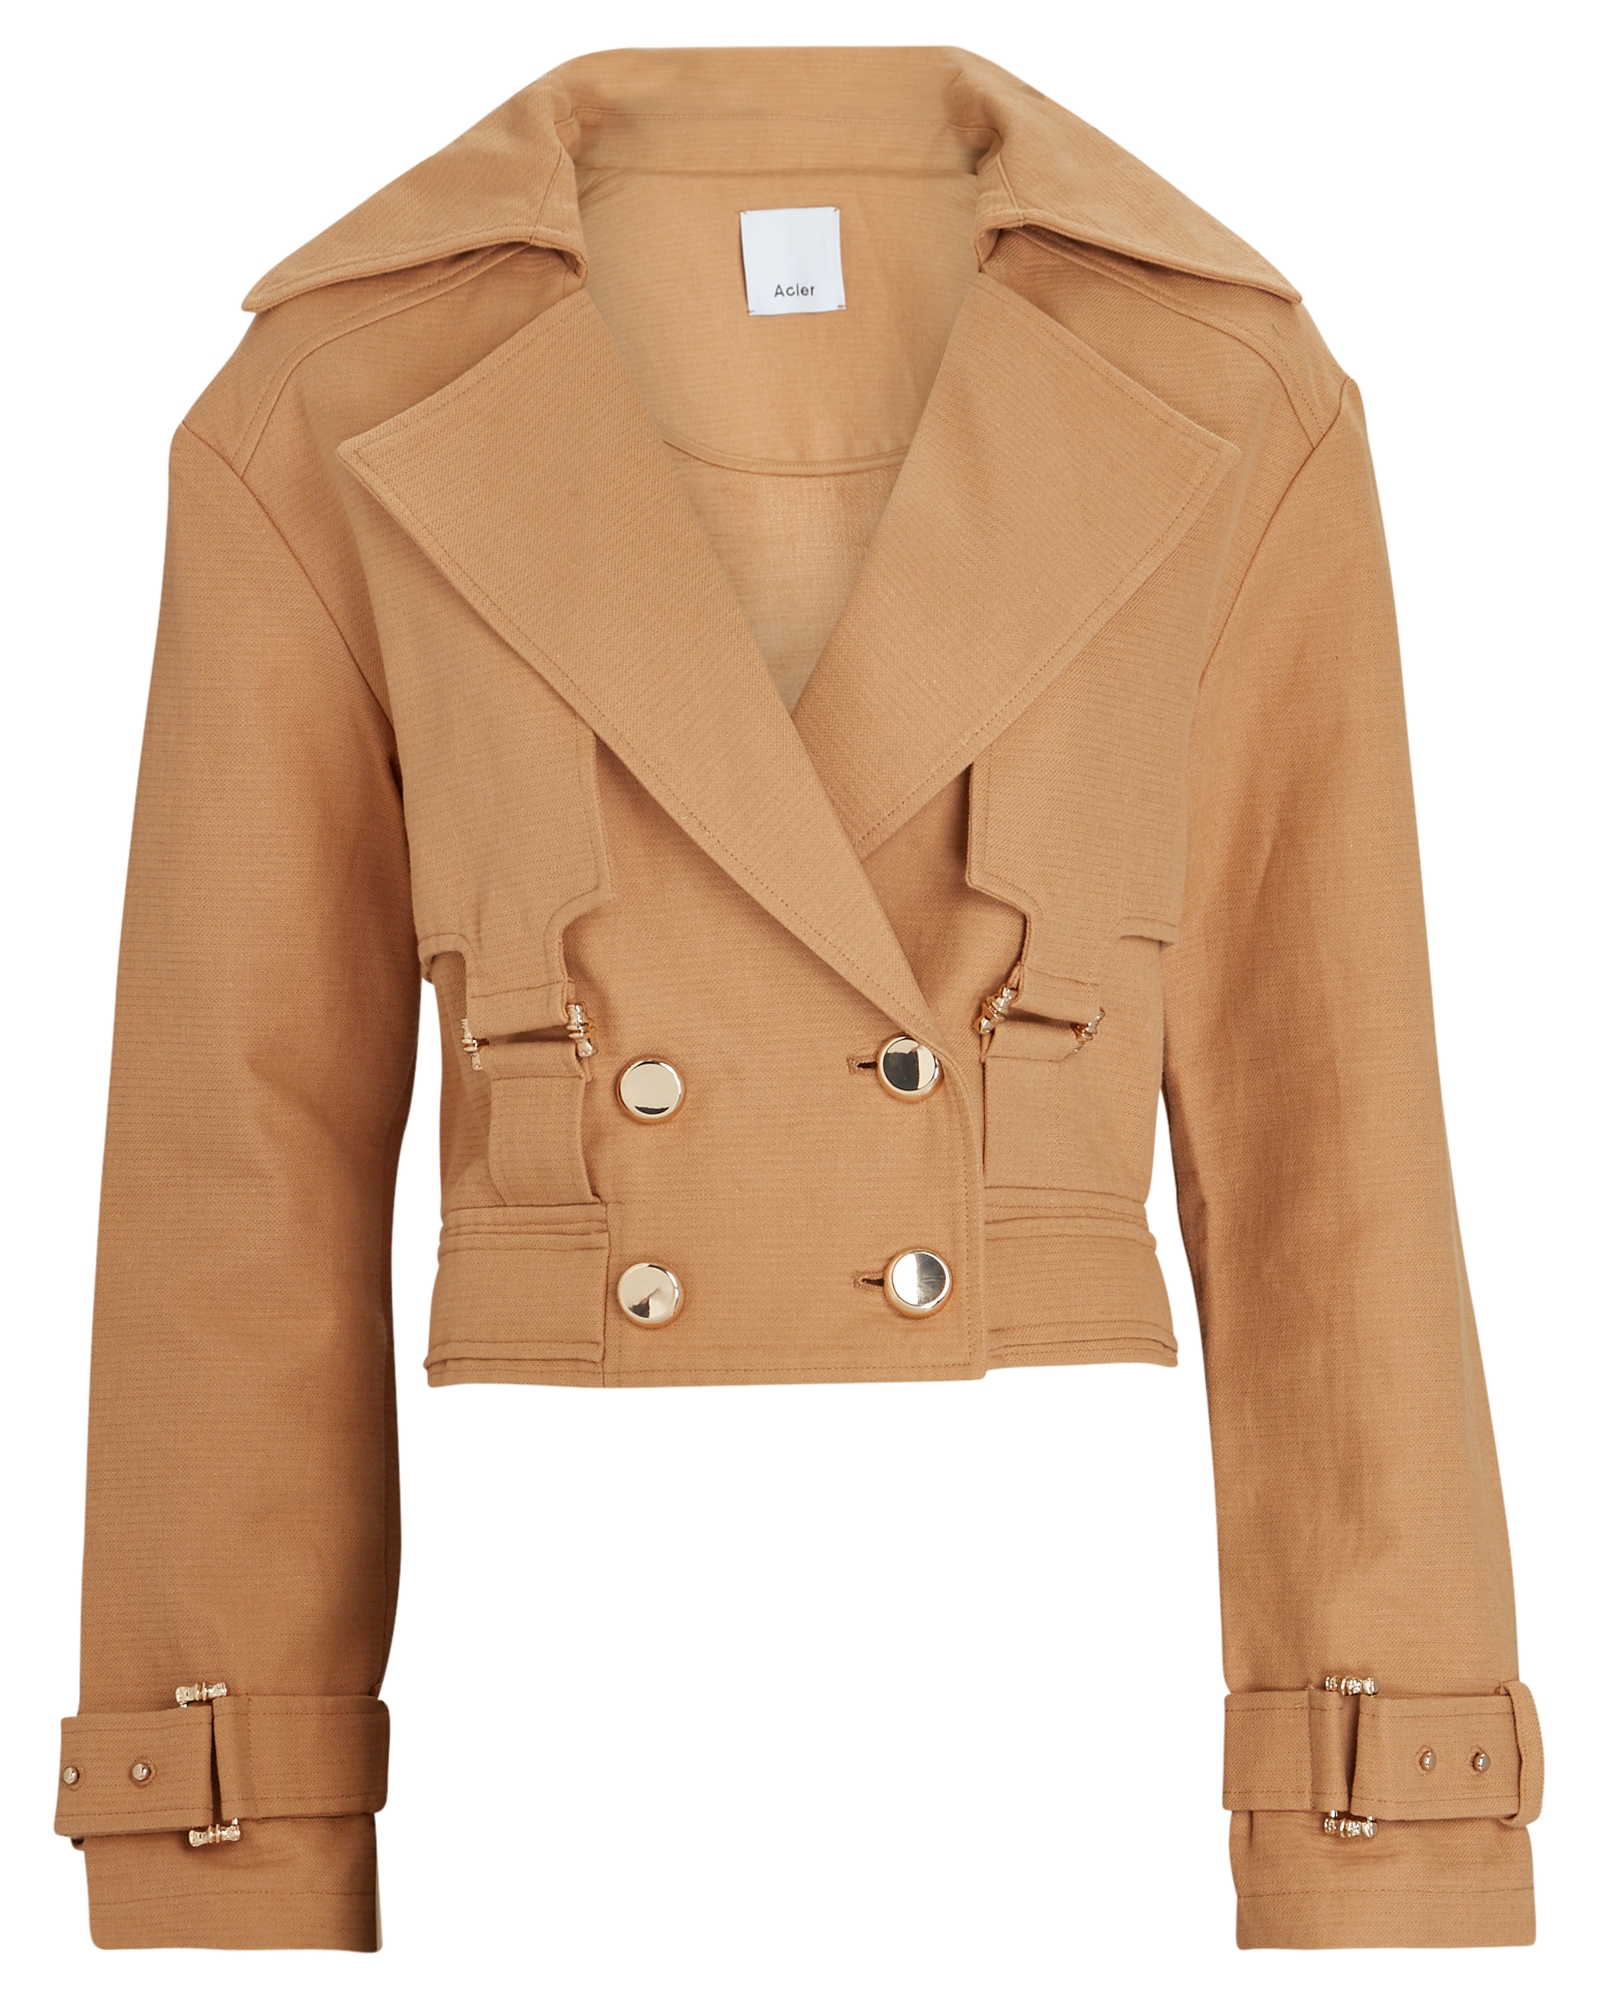 Acler Vermont Double-breasted Jacket In Beige